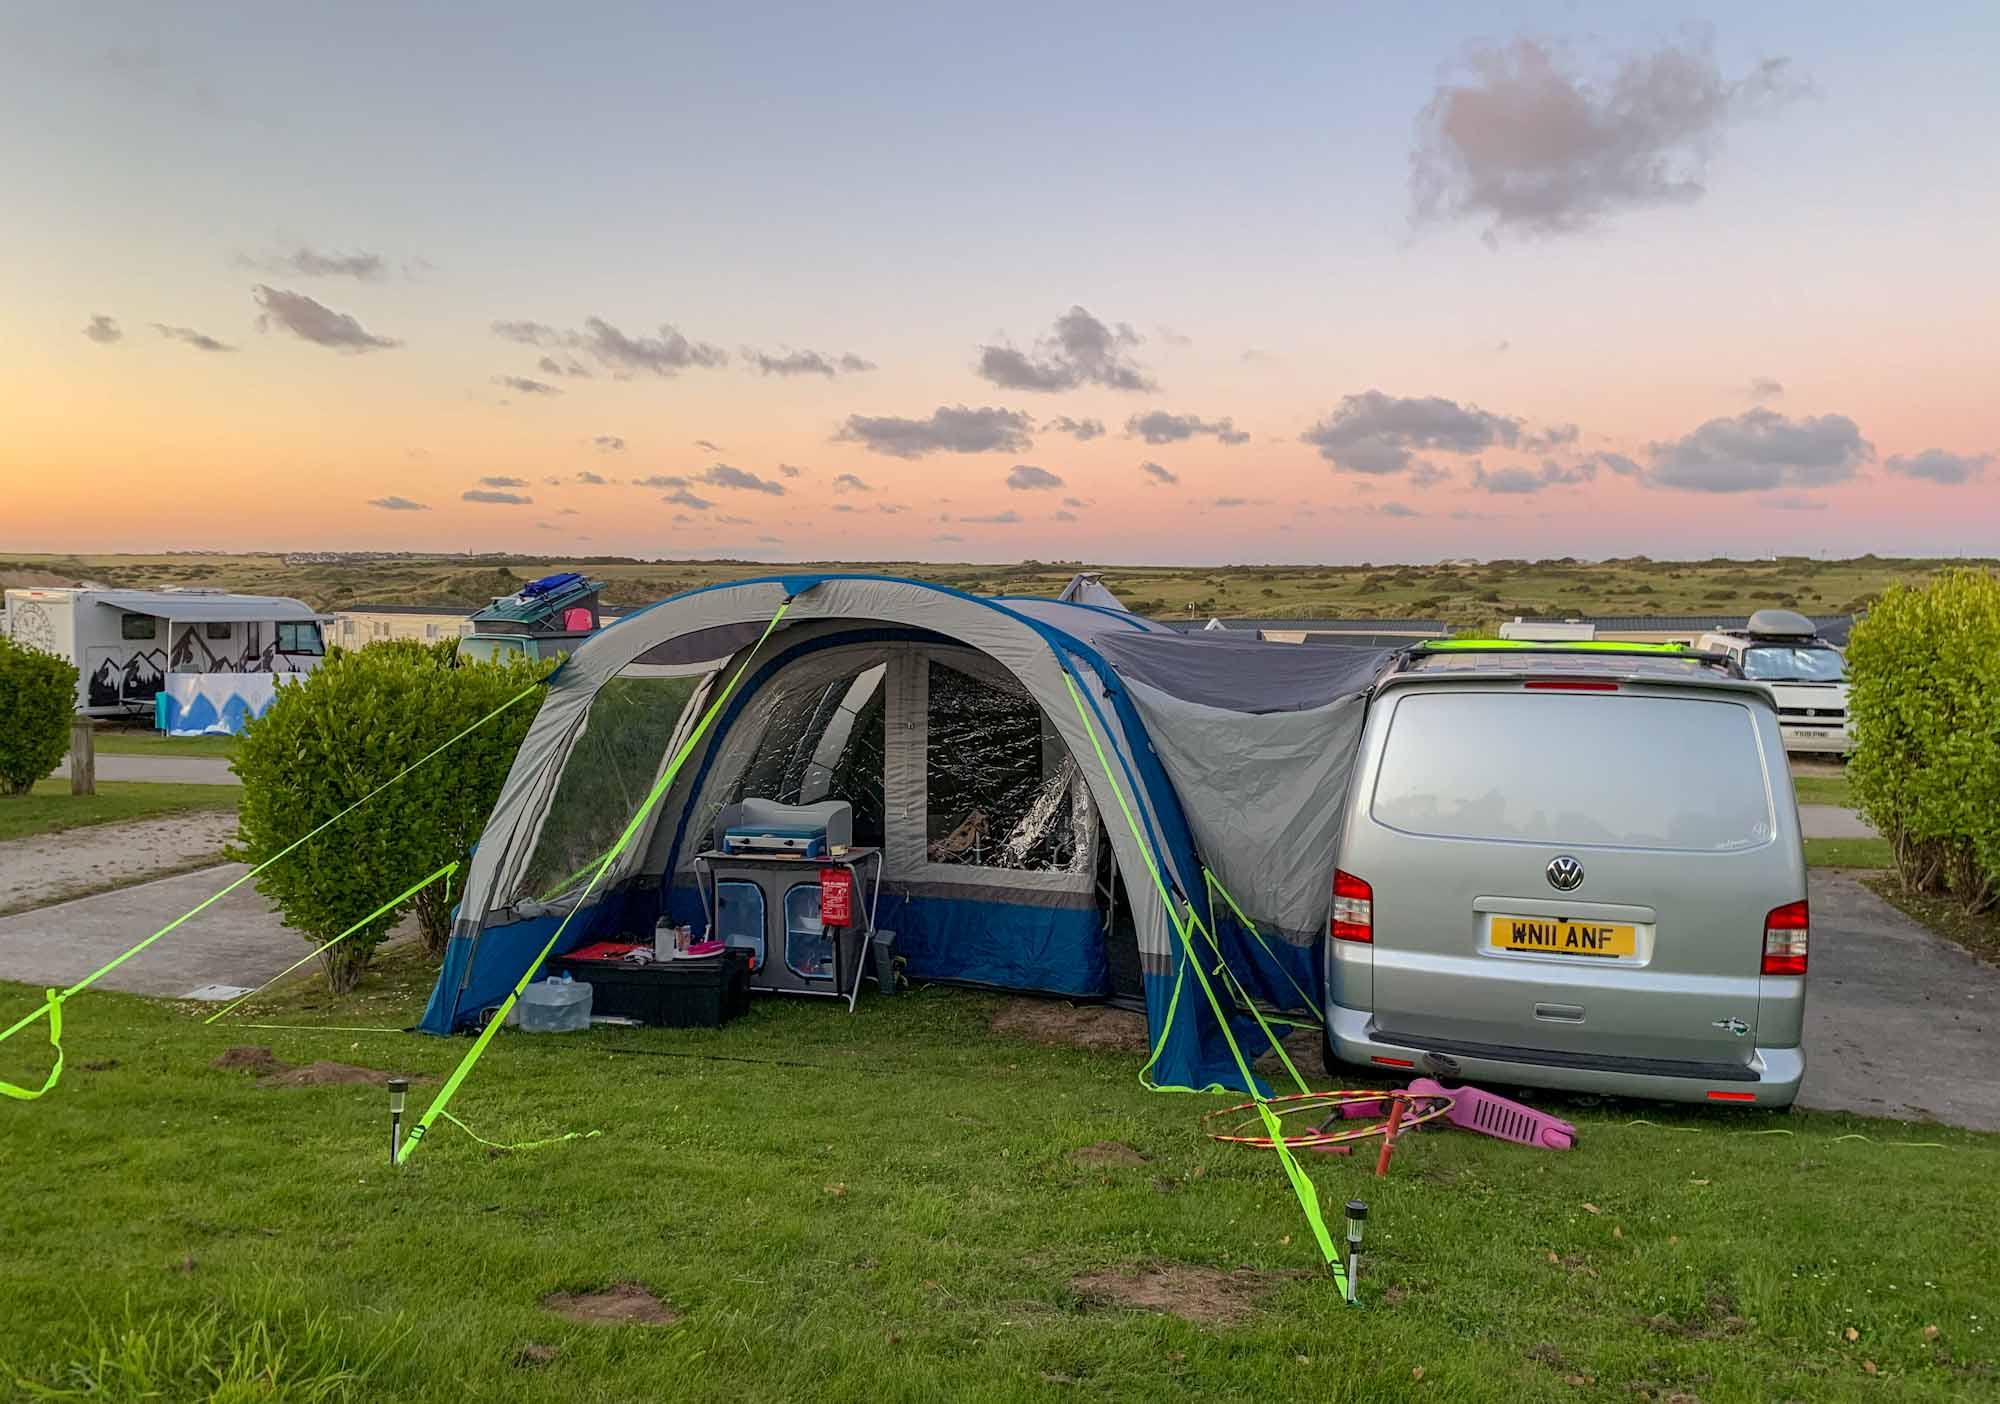 A VW Transporter campervan, with side awning tent attached, parked at a campsite, at sunset